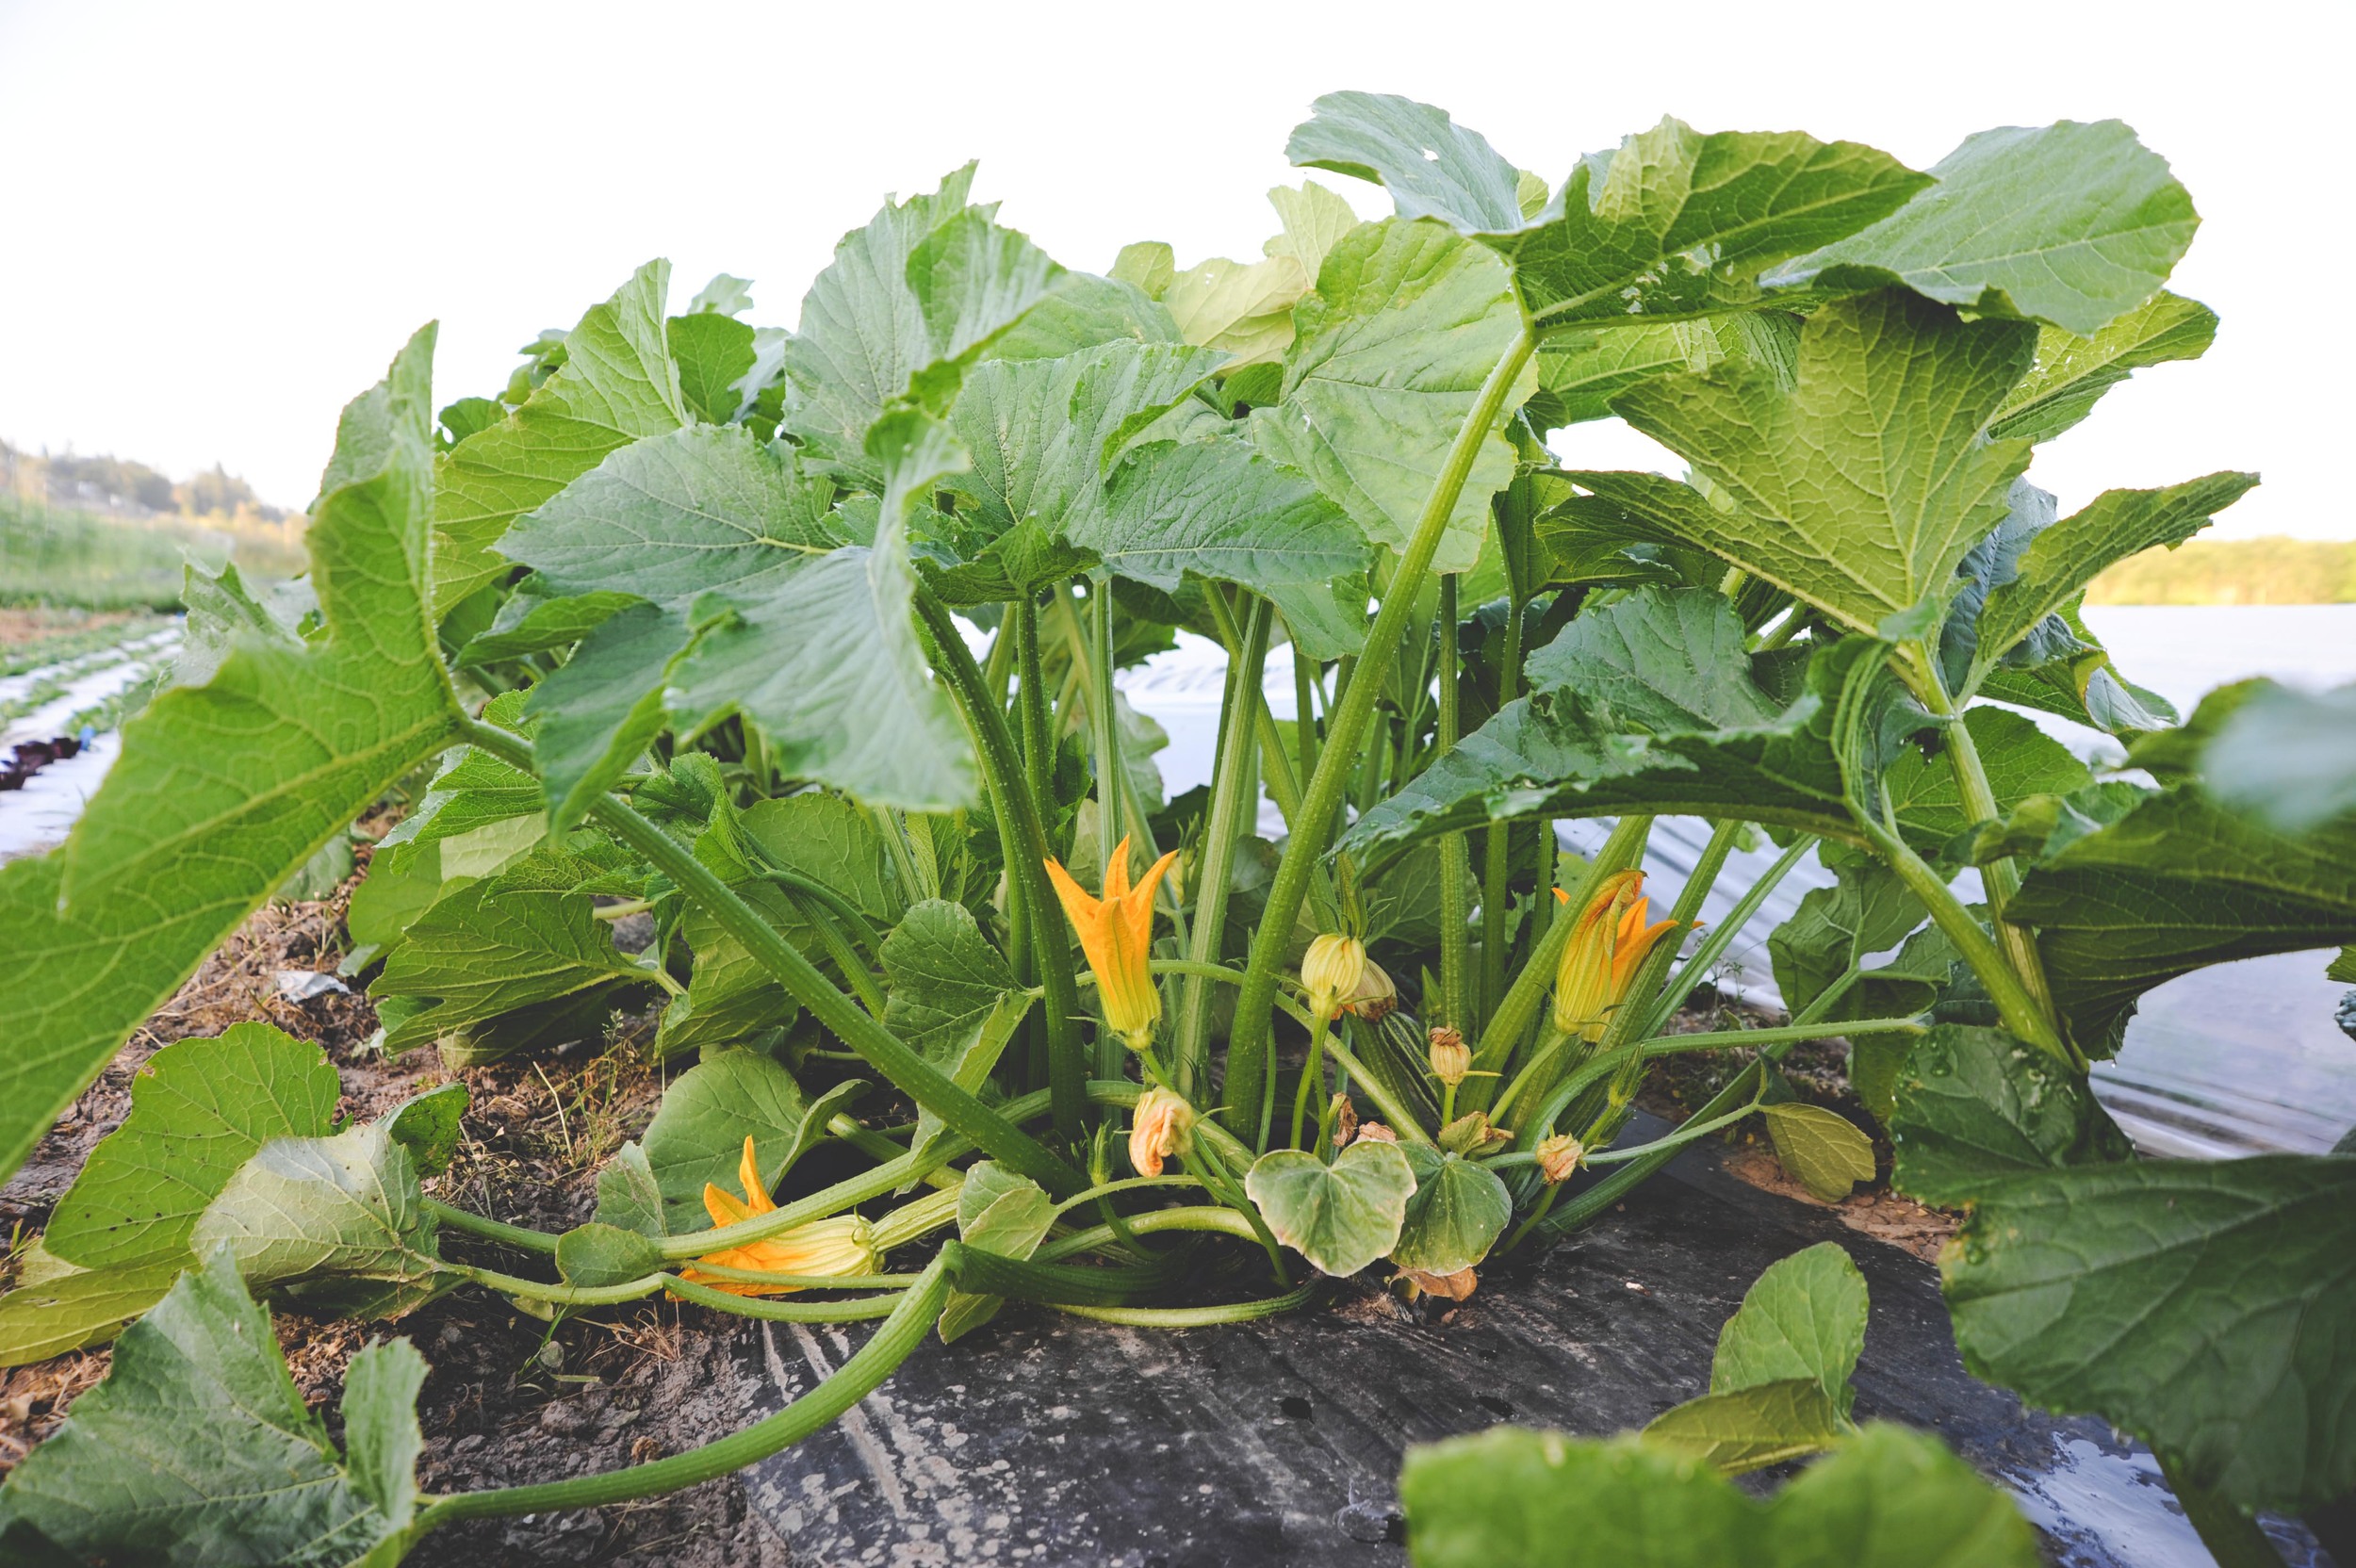 Image of Yellow summer squash plant with green leaves